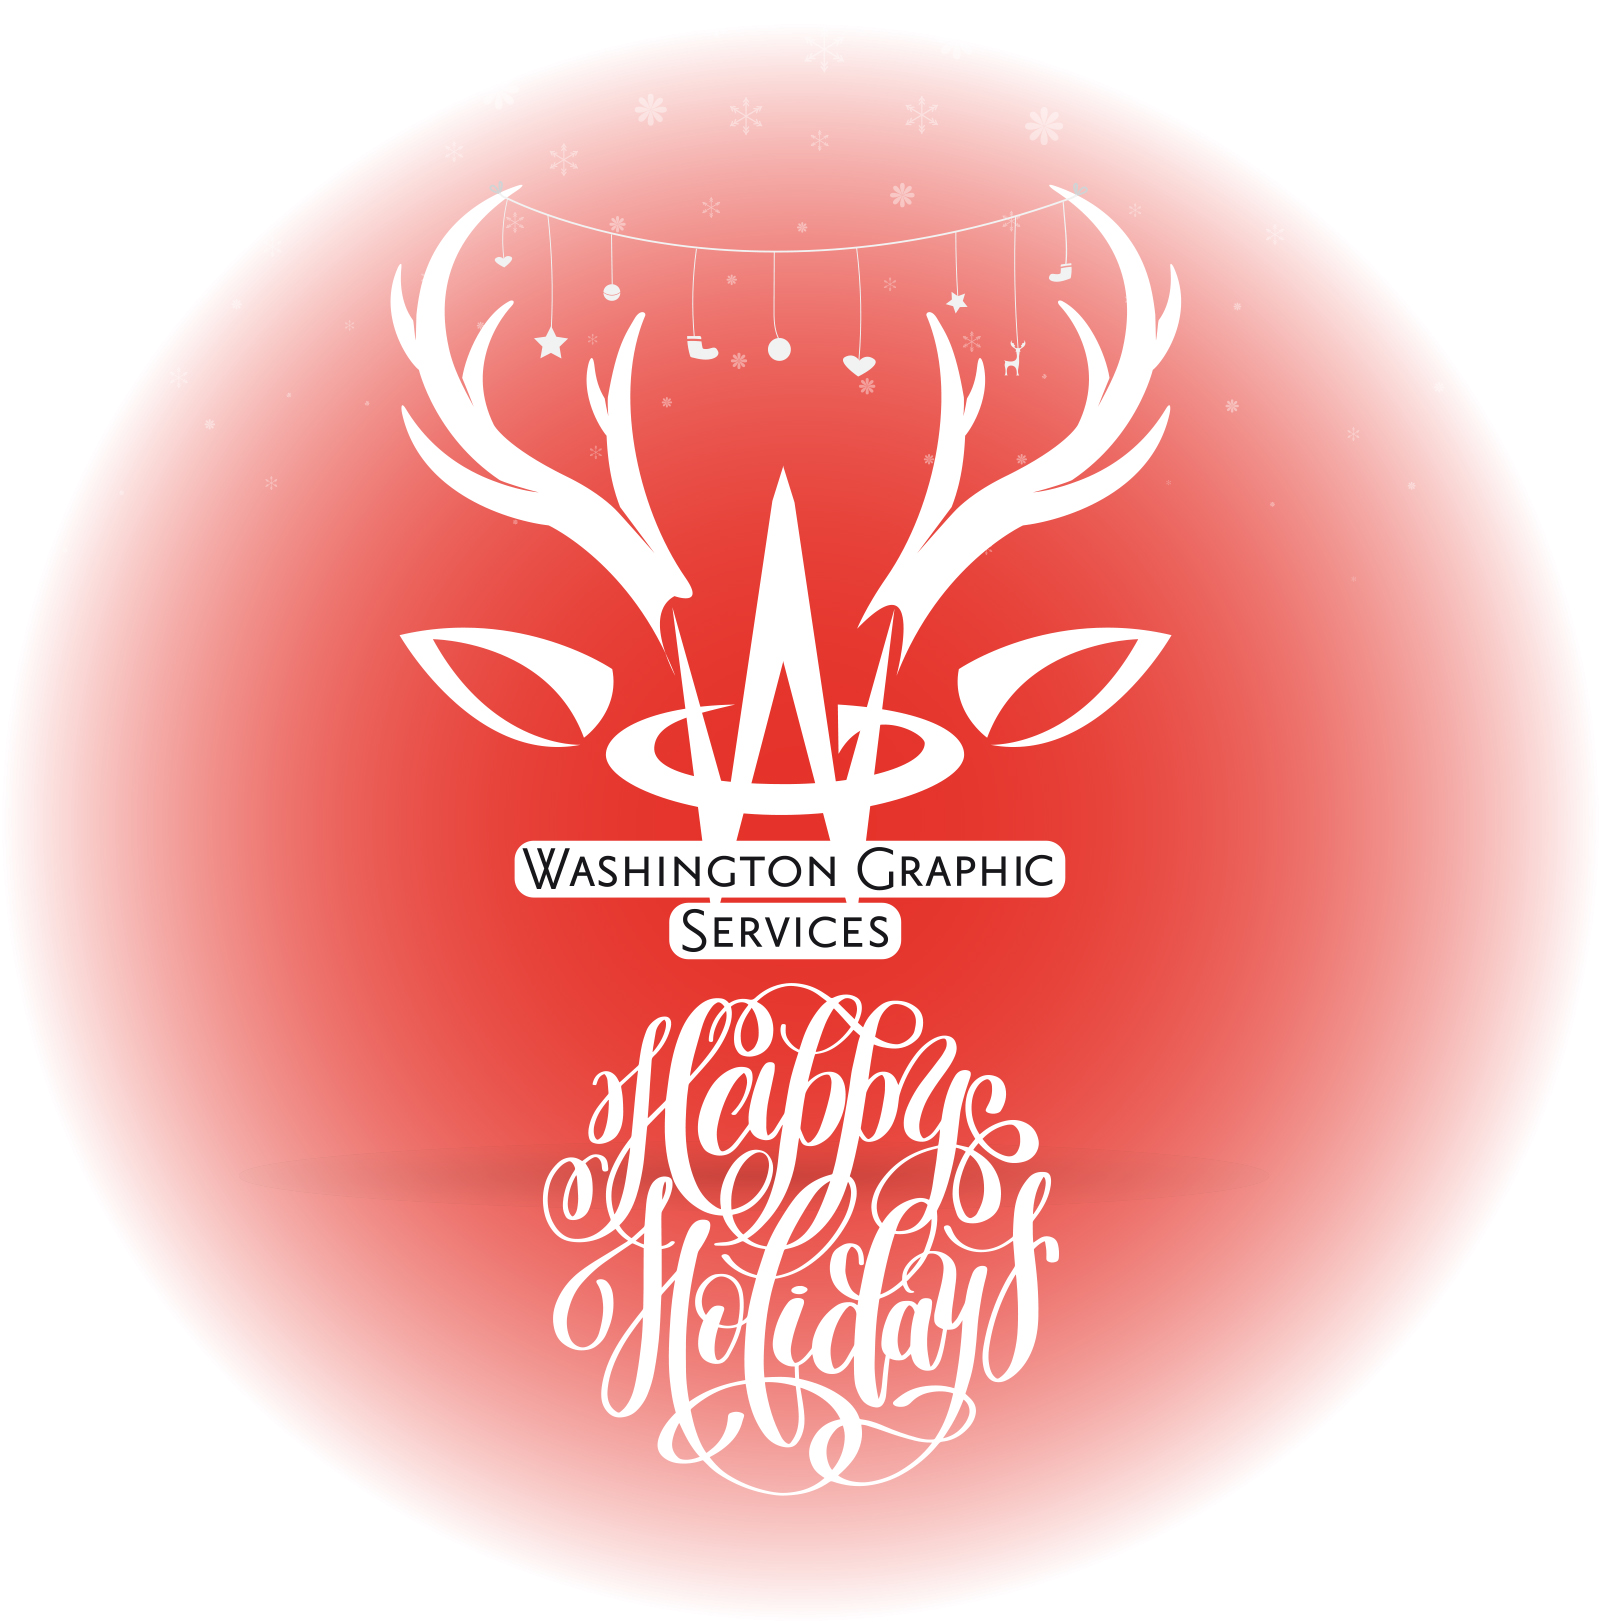 Washington Graphic Services logo with reindeer antlers